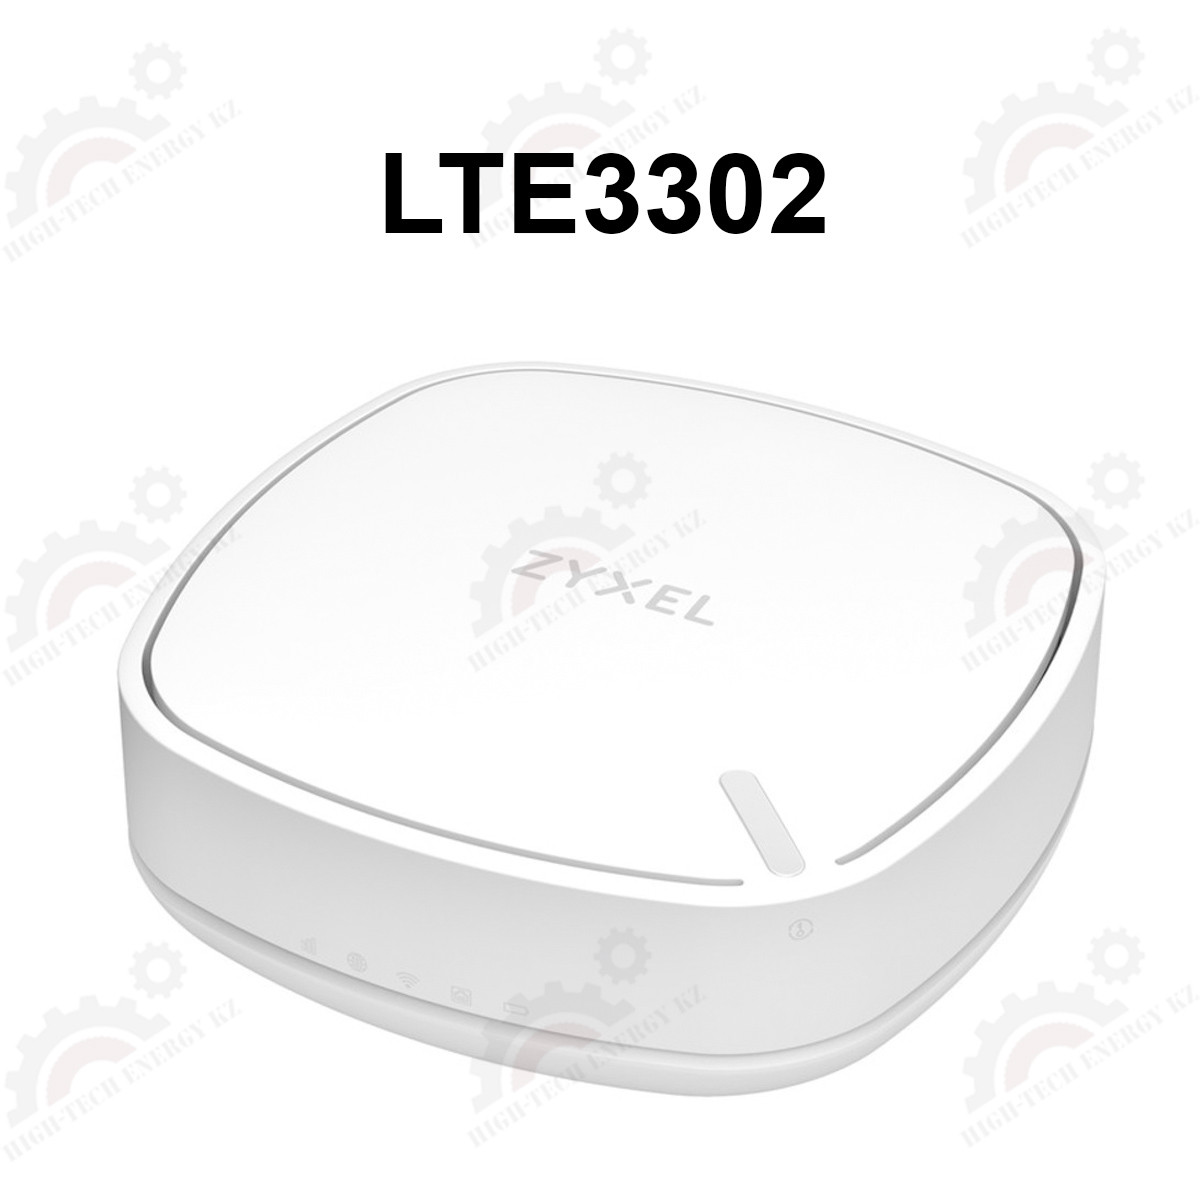 NEW. LTE Cat.4 Wi-Fi маршрутизатор Zyxel LTE3302-M432 - фото 1 - id-p66184745